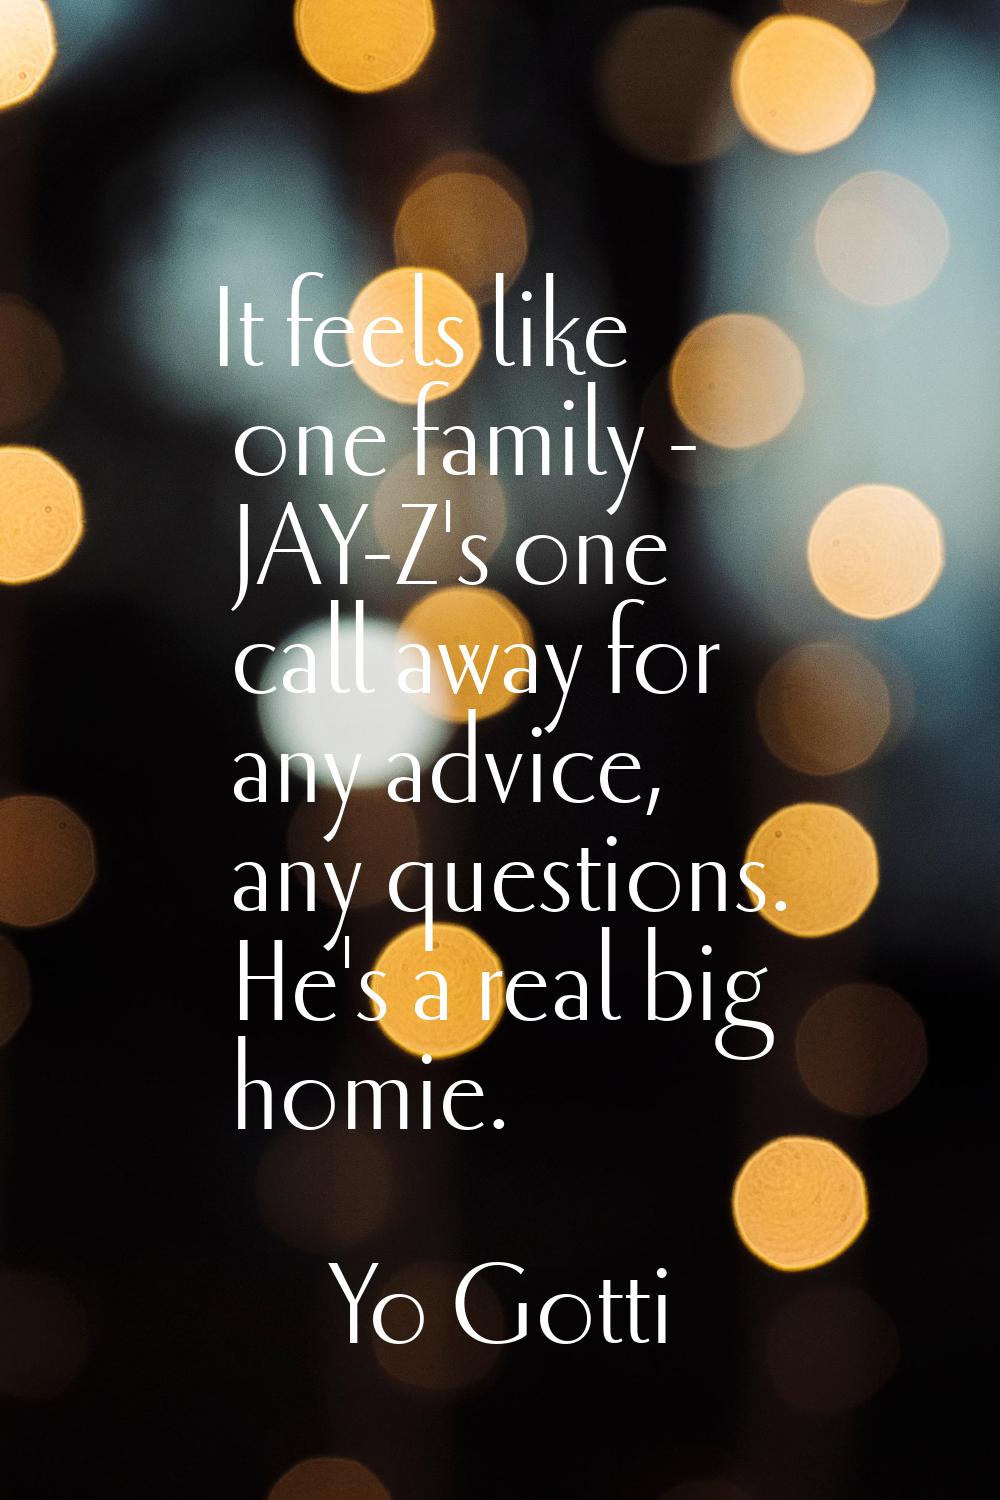 It feels like one family - JAY-Z's one call away for any advice, any questions. He's a real big hom